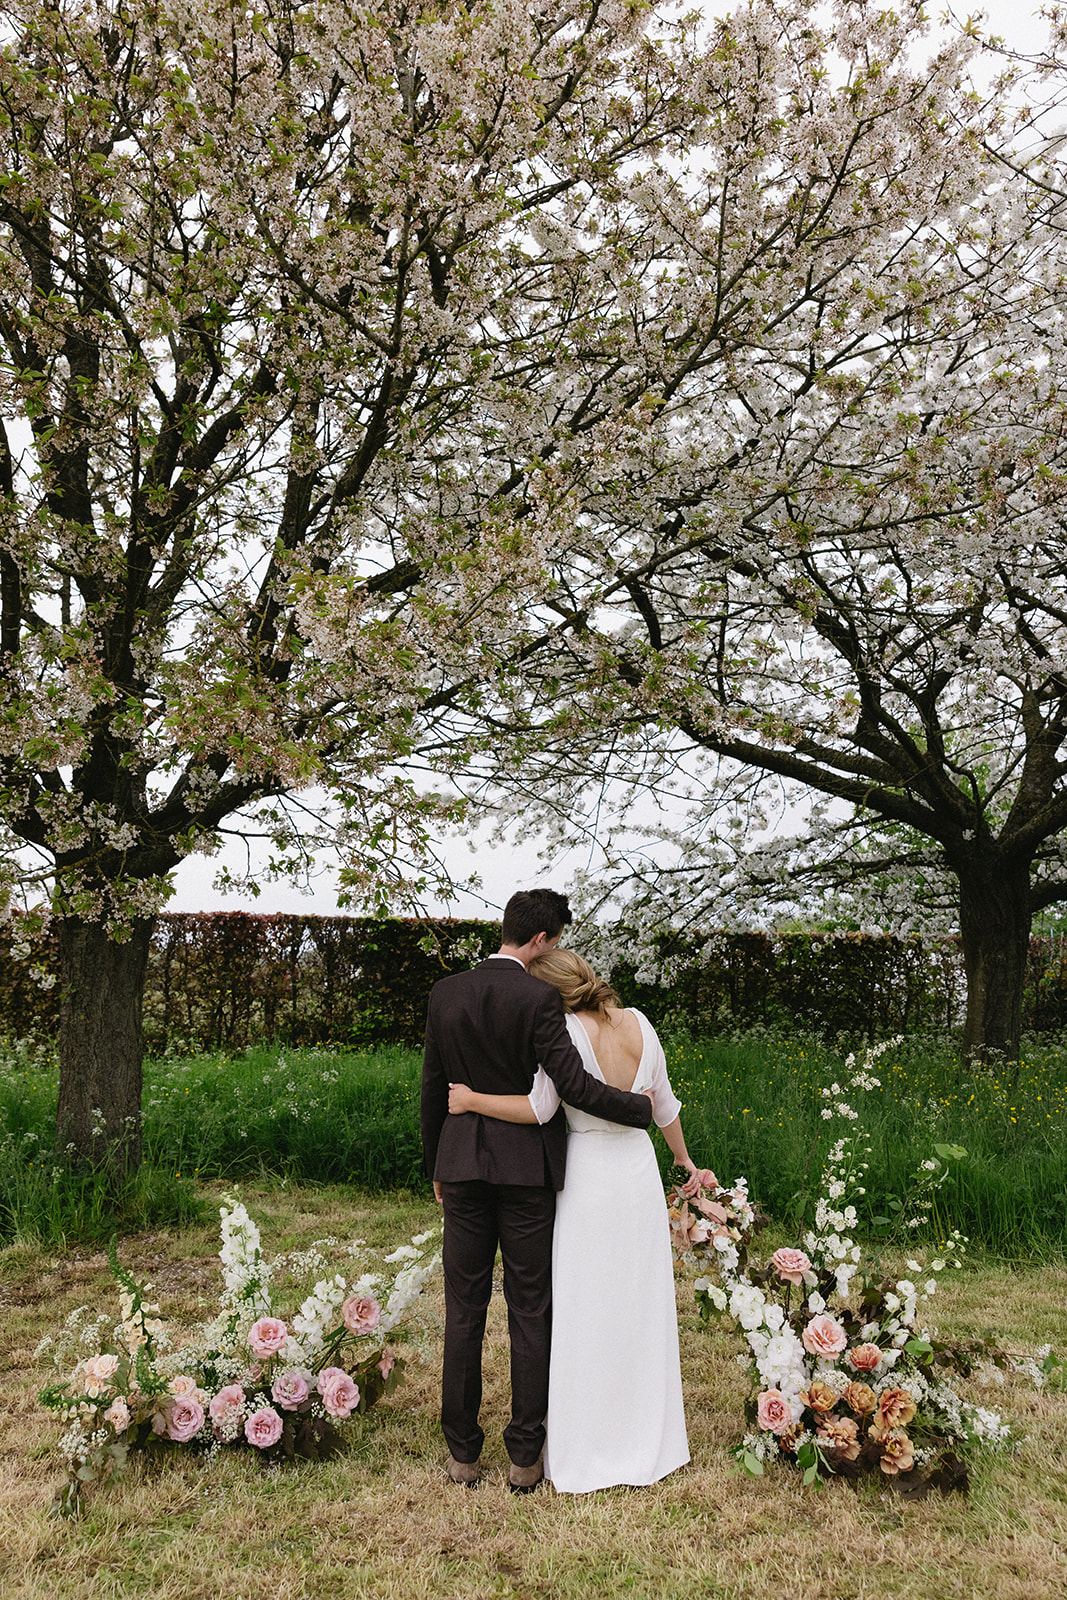 Bride and groom sharing a tender moment in natural surroundings